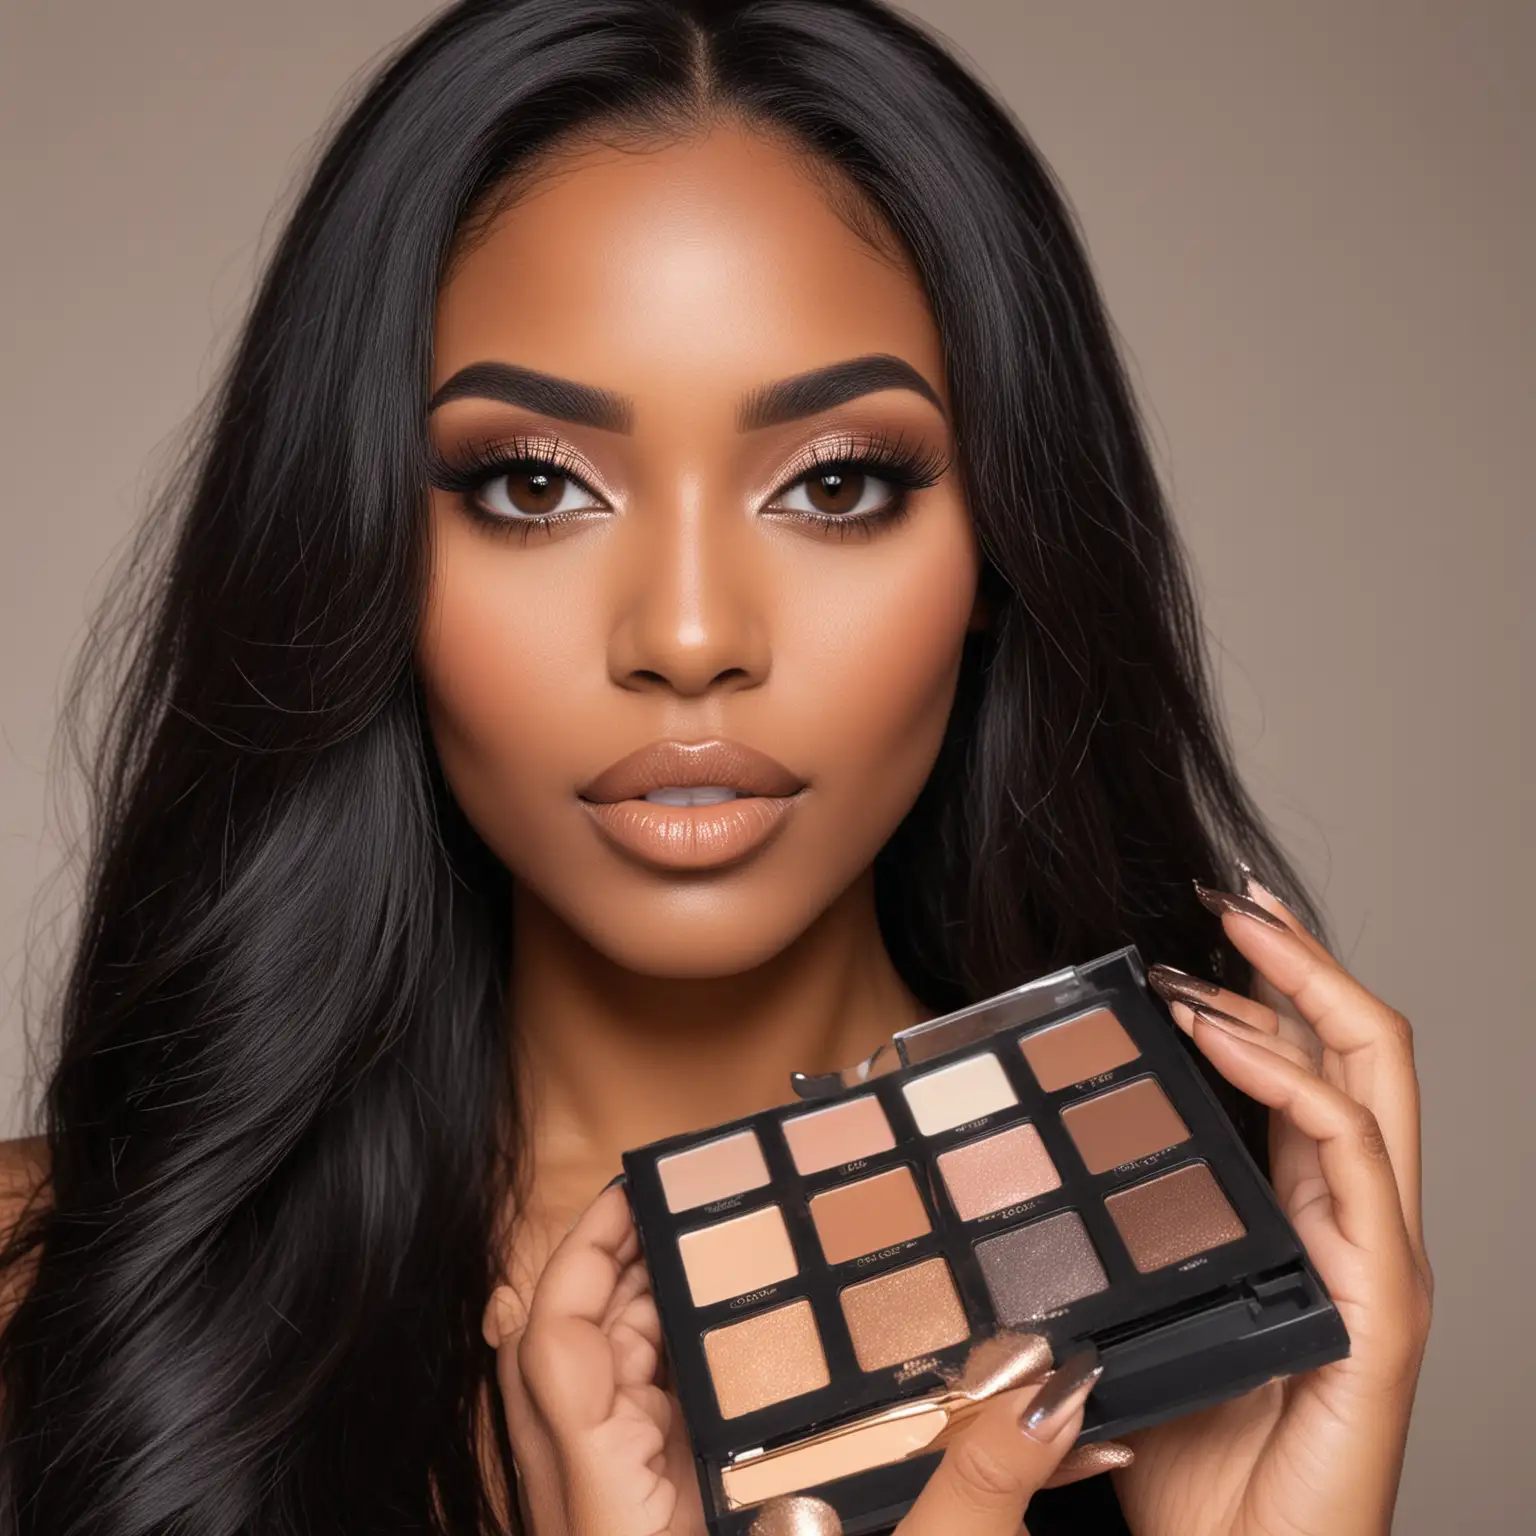 Beautiful African American woman with long black hair, neutral facial expression, long voluminous lashes, Glam makeup look, holding makup palette, luxury photoshoot